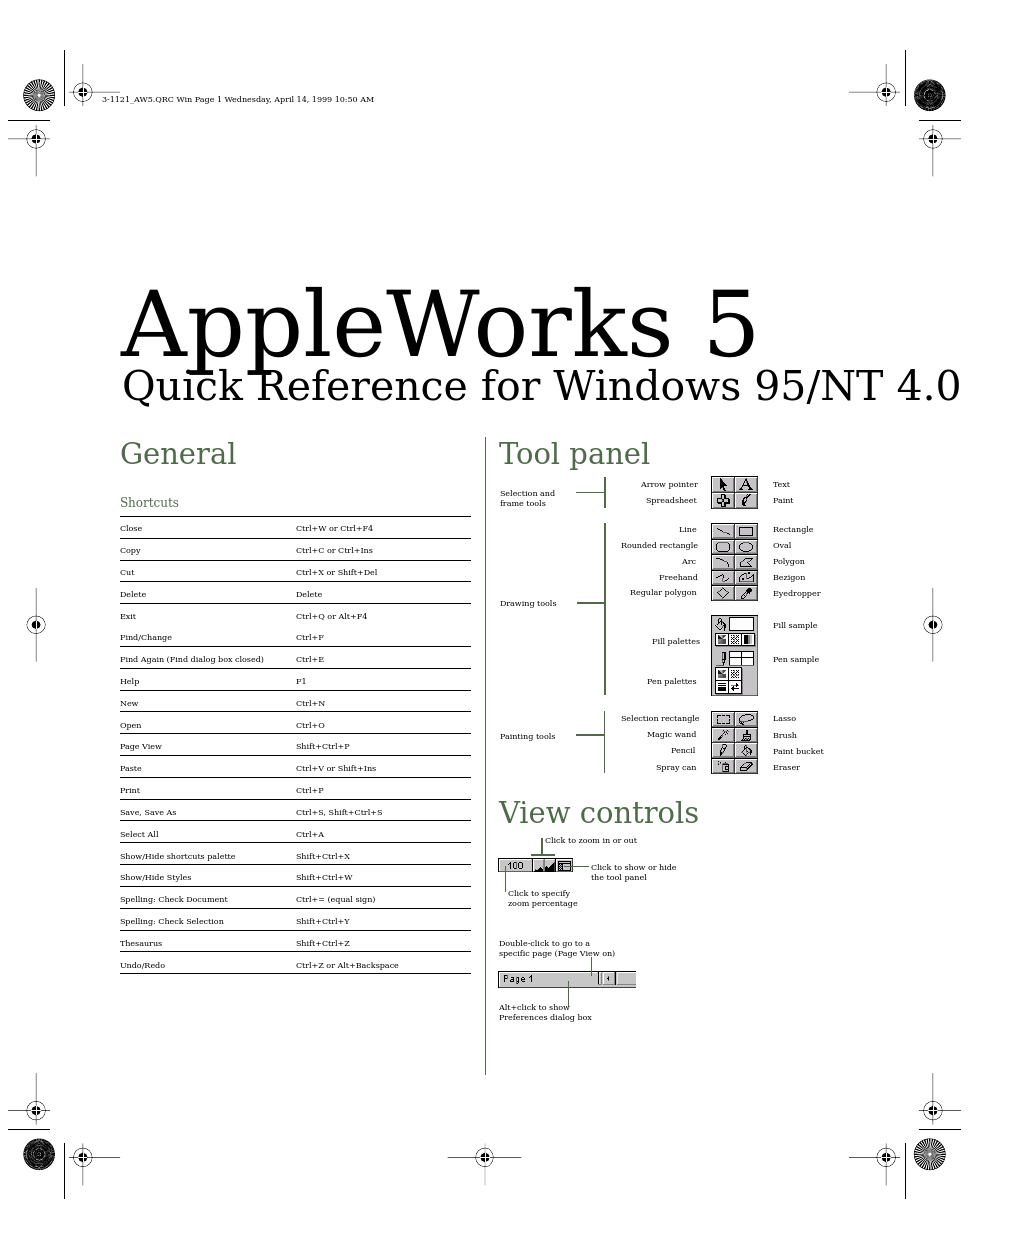 AppleWorks 5 Quick Reference: Windows 95/NT 4.0